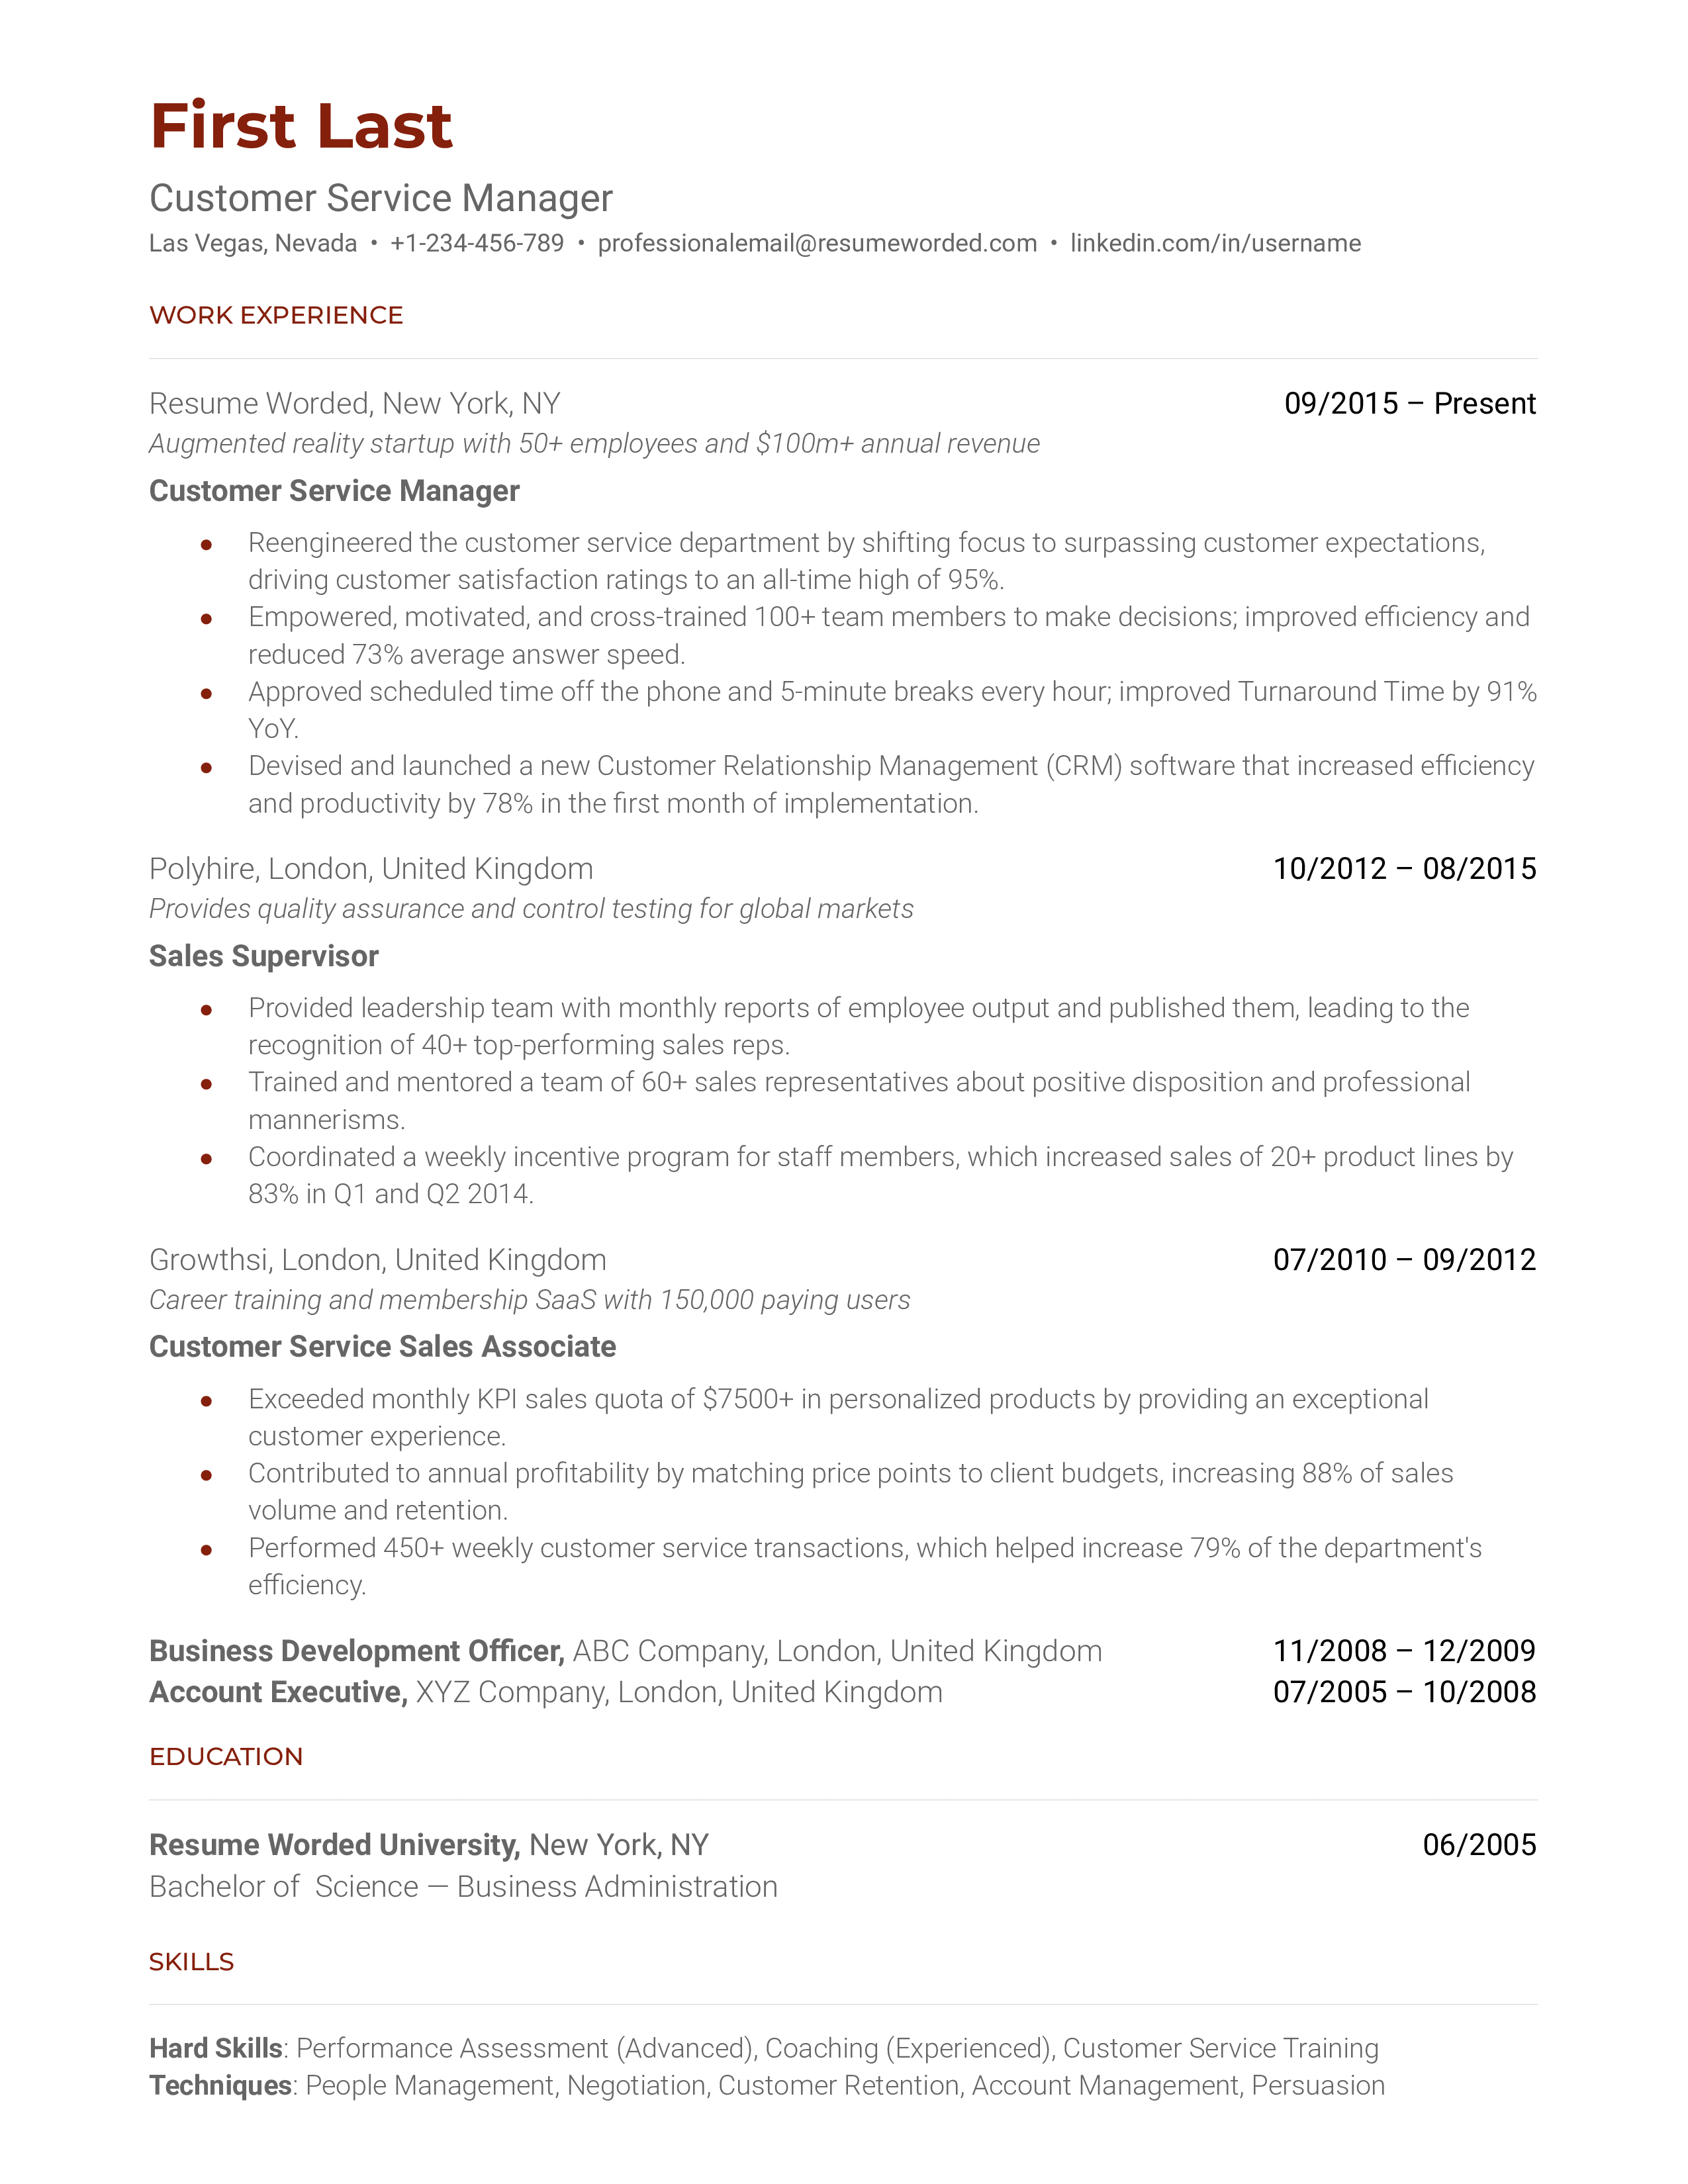 A resume for a customer service manager with a degree in customer service management and experience as a customer service representative.